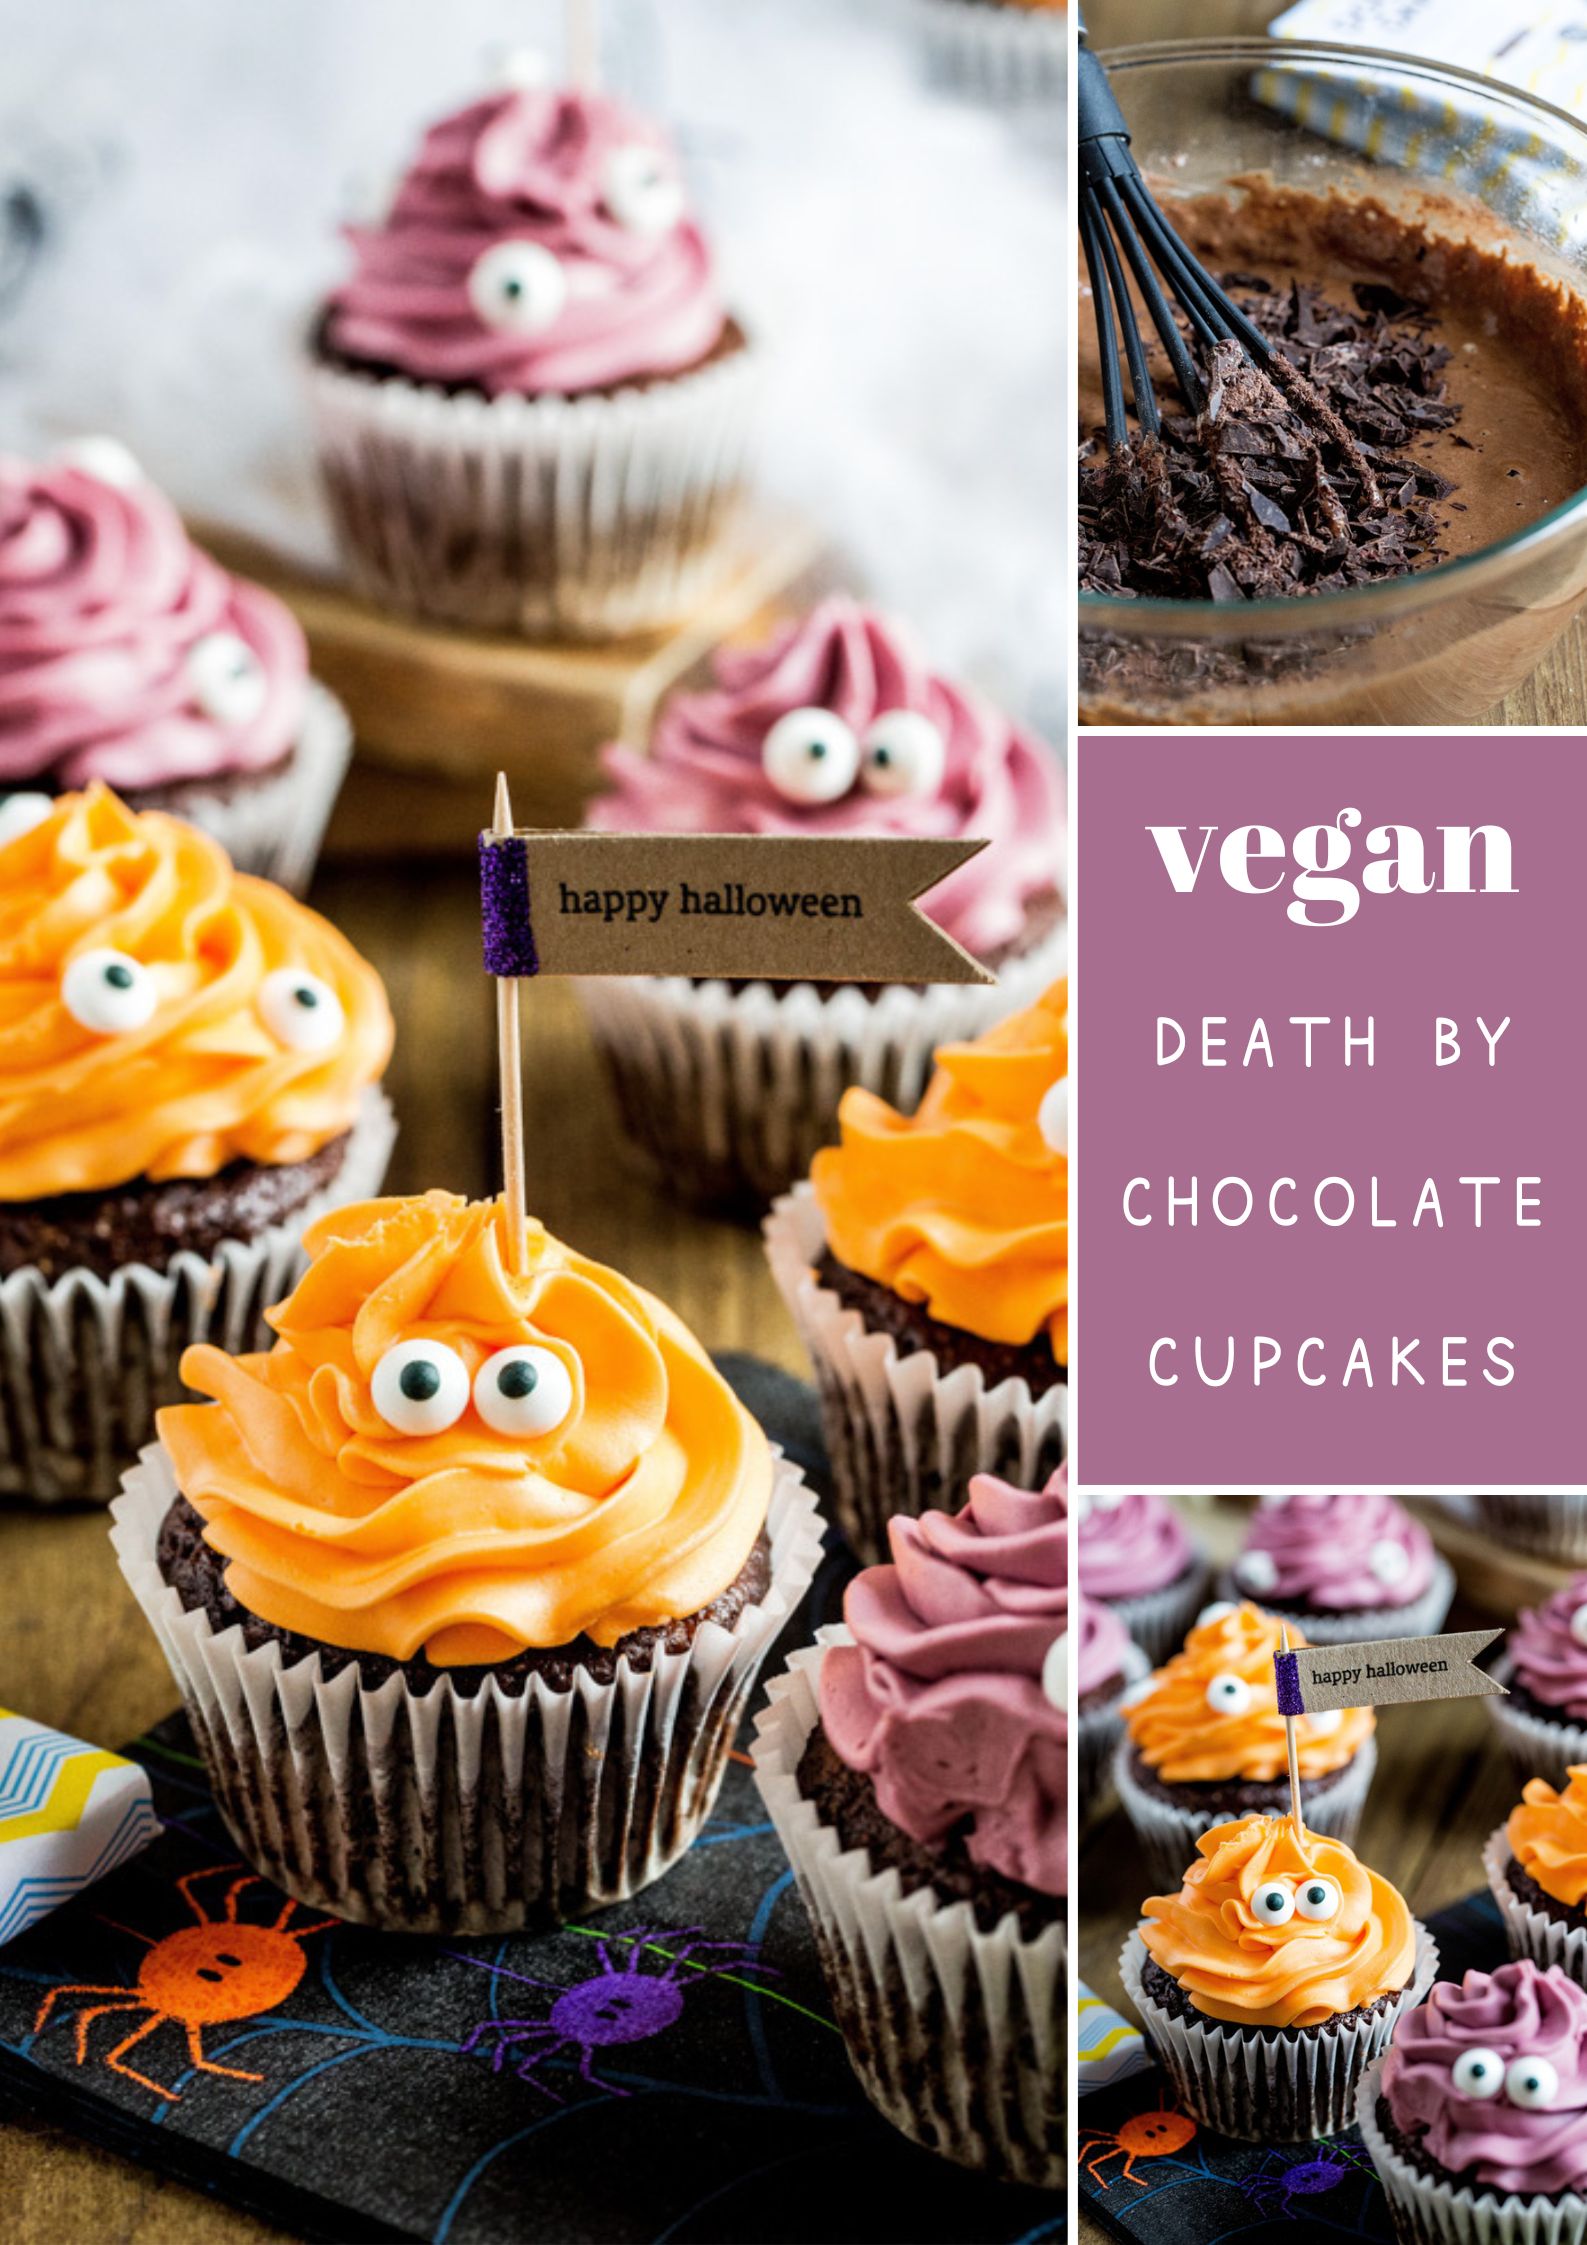 These spooky cute Death by Chocolate Cupcakes with devilishly dark chocolate and supernaturally sweet vegan frosting are a super easy vegan Halloween recipe! Recipe on thecookandhim.com | #halloweenrecipes #veganhalloween #veganbaking #chocolatecupcakes #deathbychocolate #halloweenpartyfood